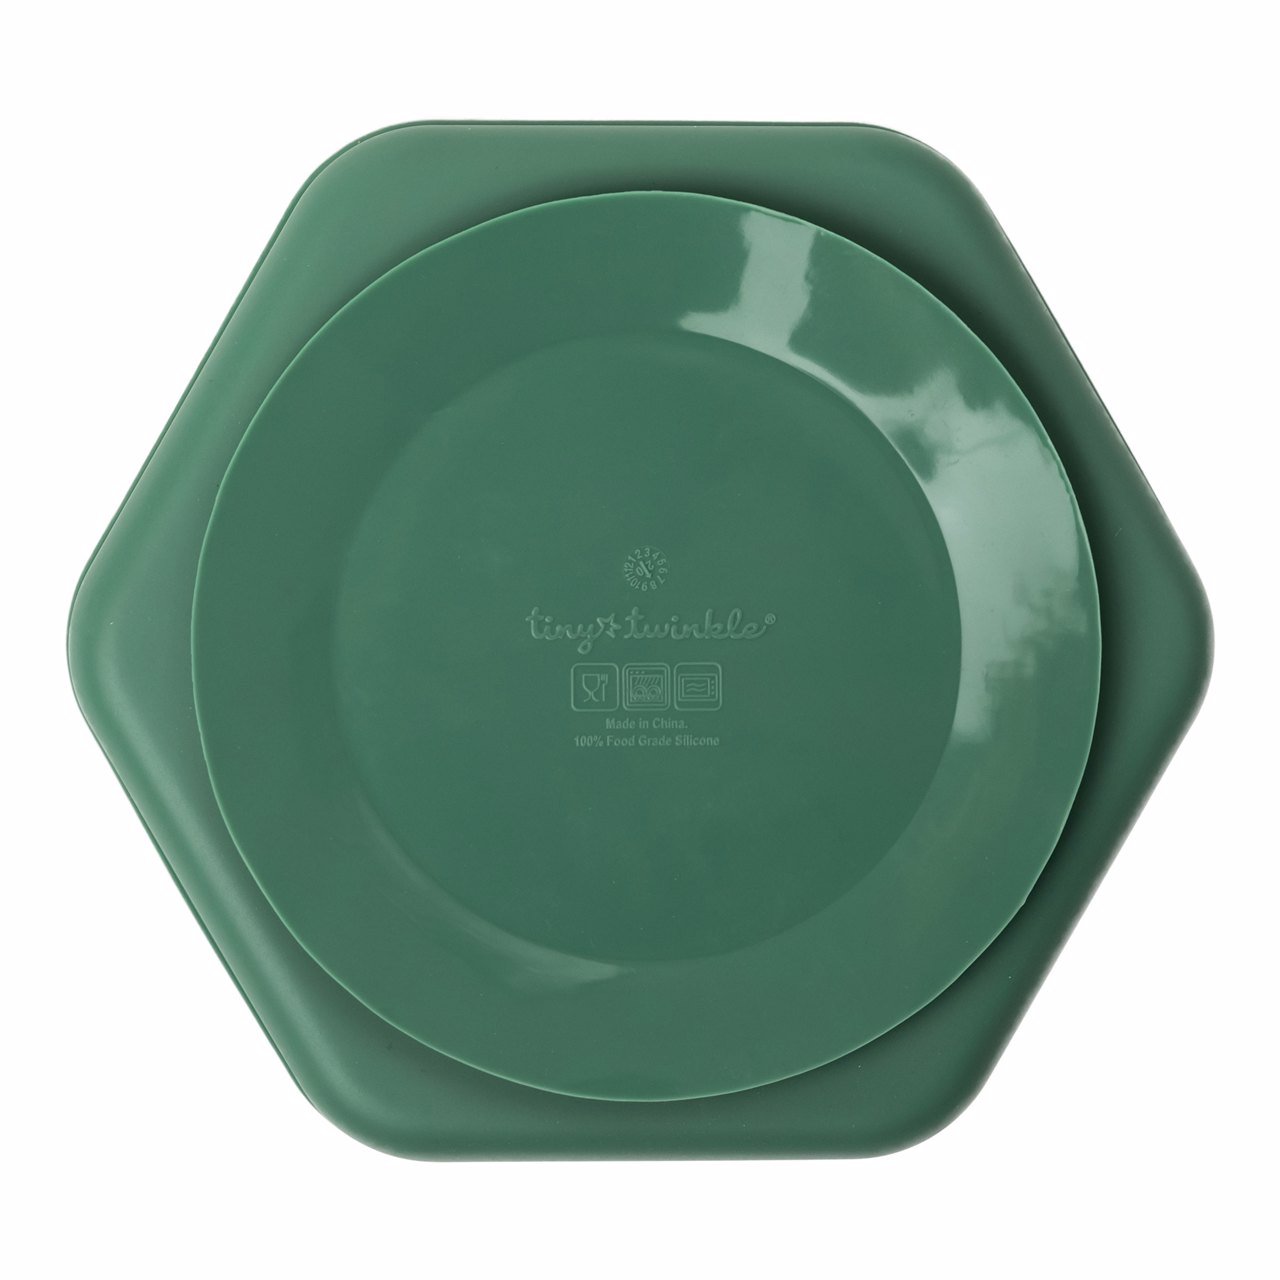 Tiny Twinkle - Silicone Suction Plate - Olive Green